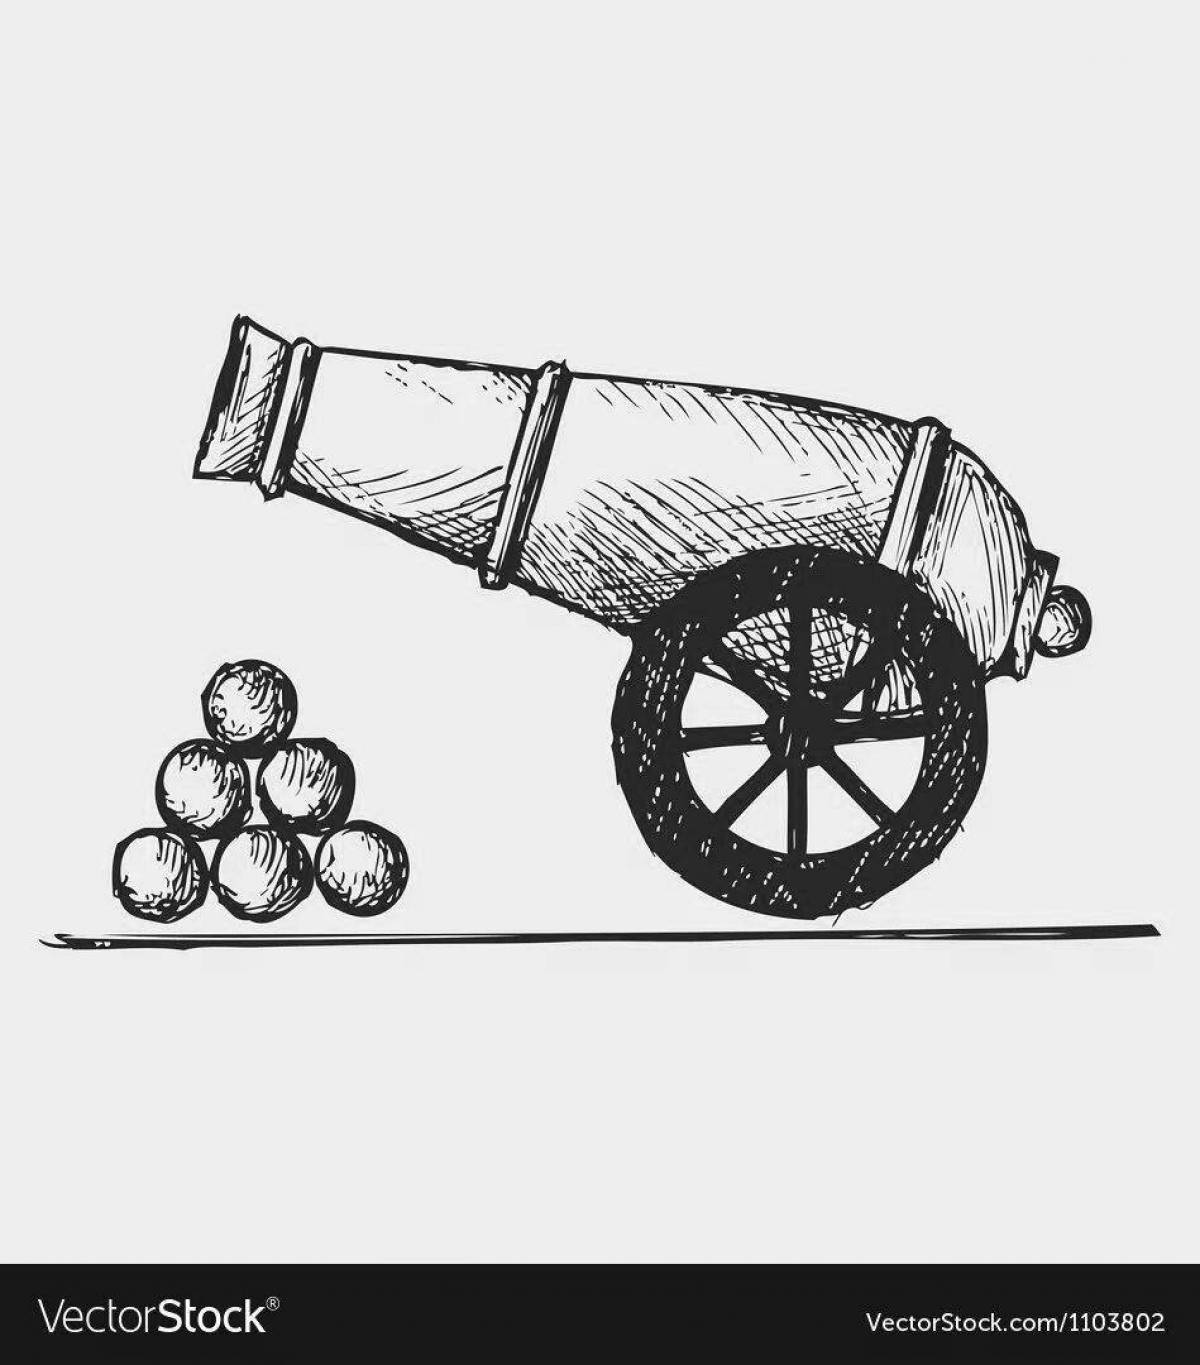 Tsar cannon coloring page with ornaments